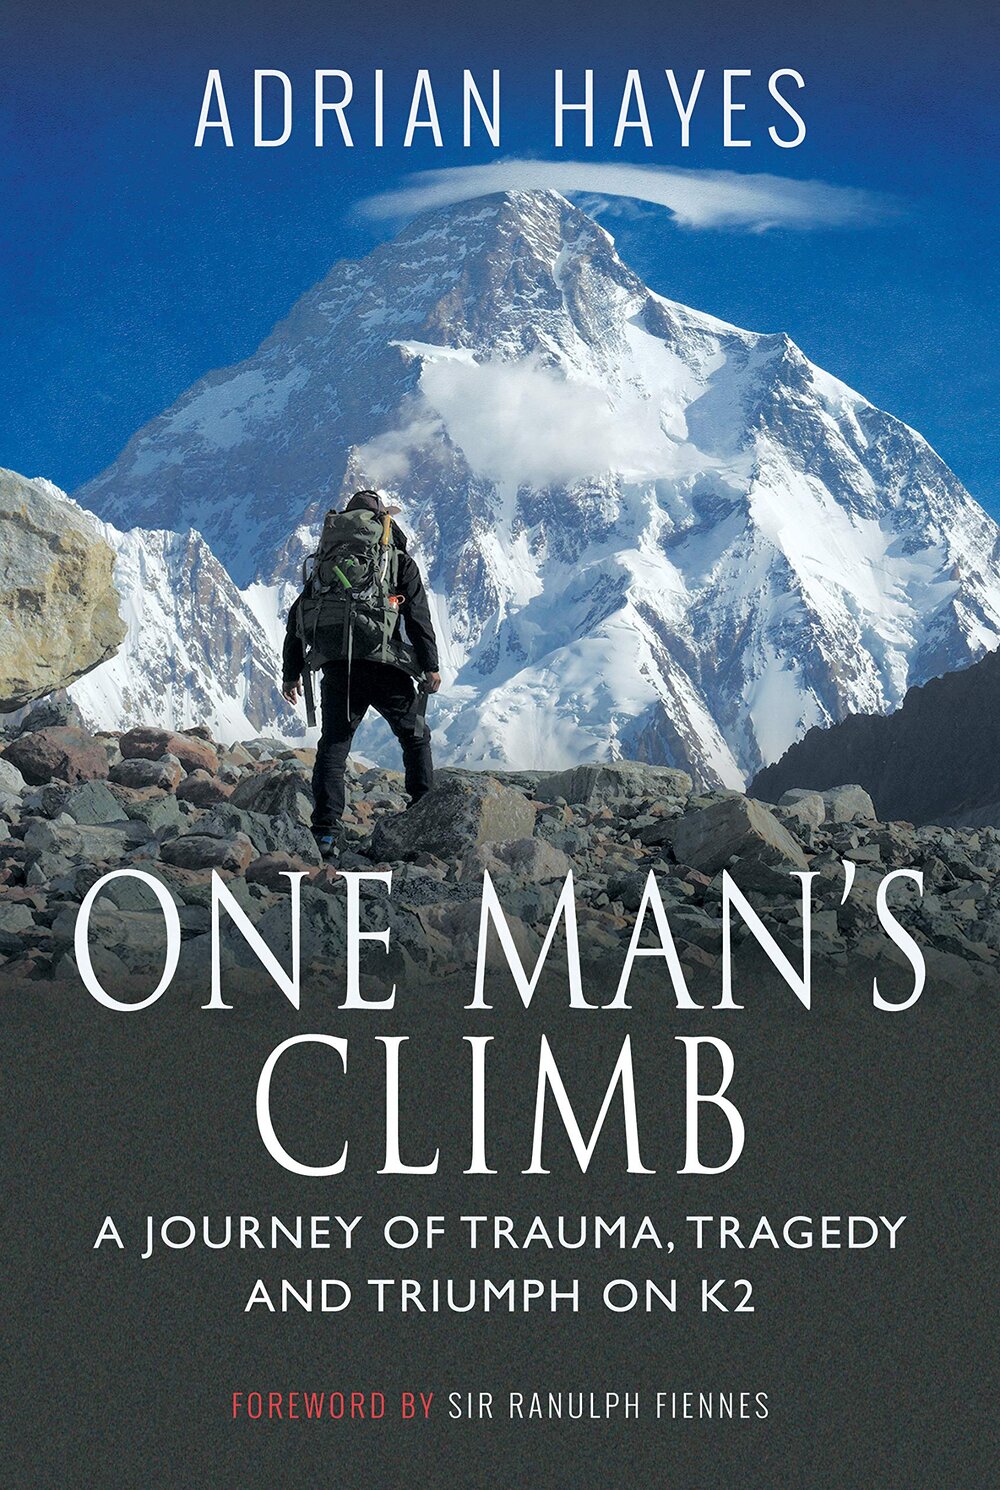 One Man's Climb: A Journey of Trama, Tragedy and Triumph on K2 by Adrian Hayes